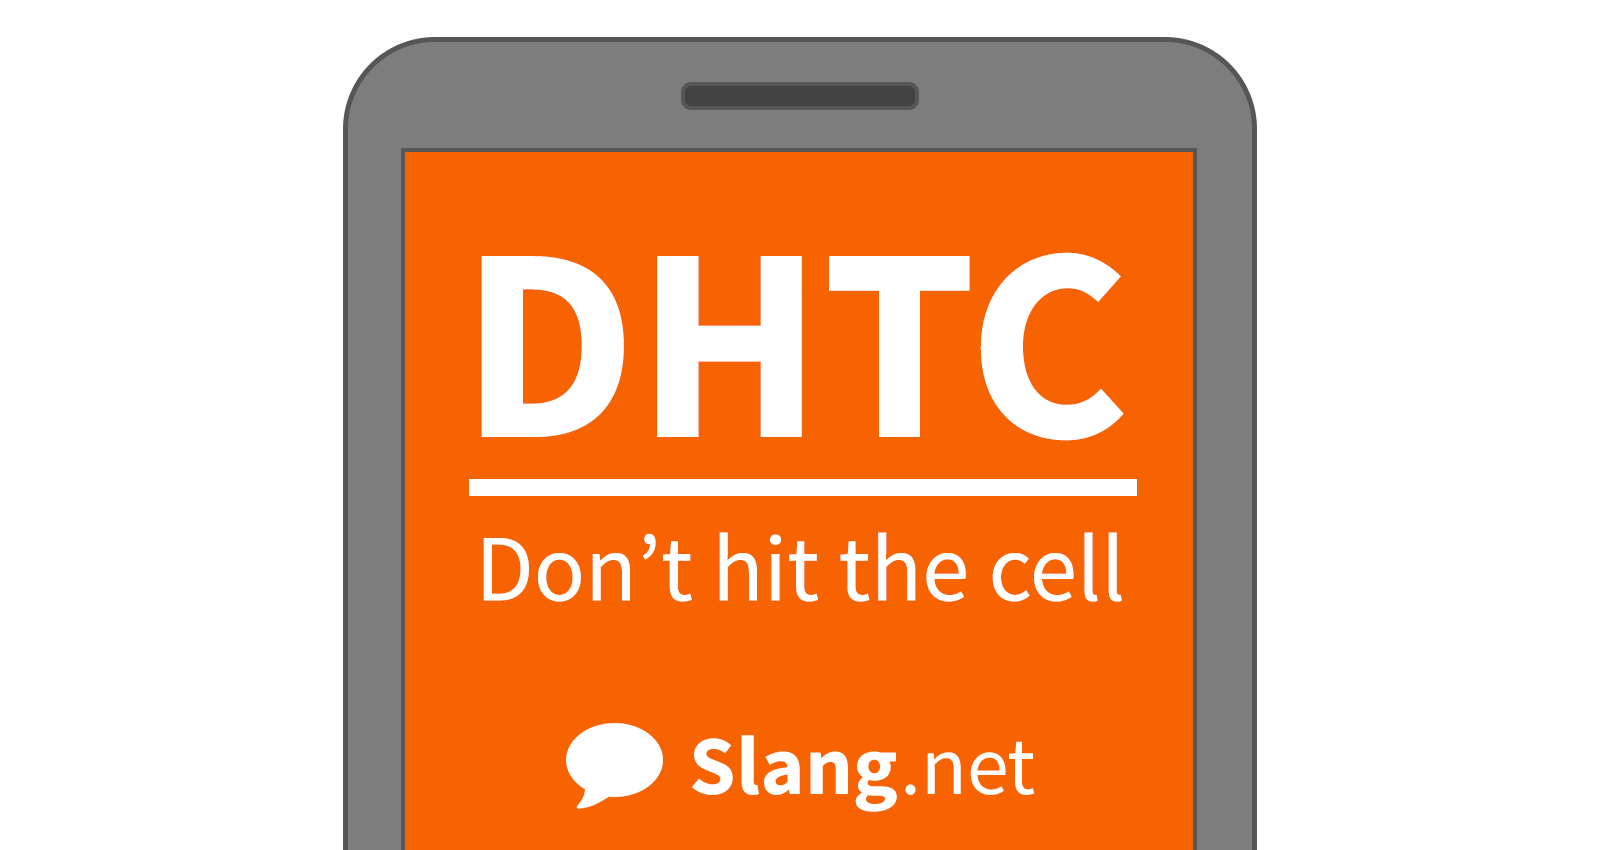 You will likely see DHTC in texts; be sure not to respond to it